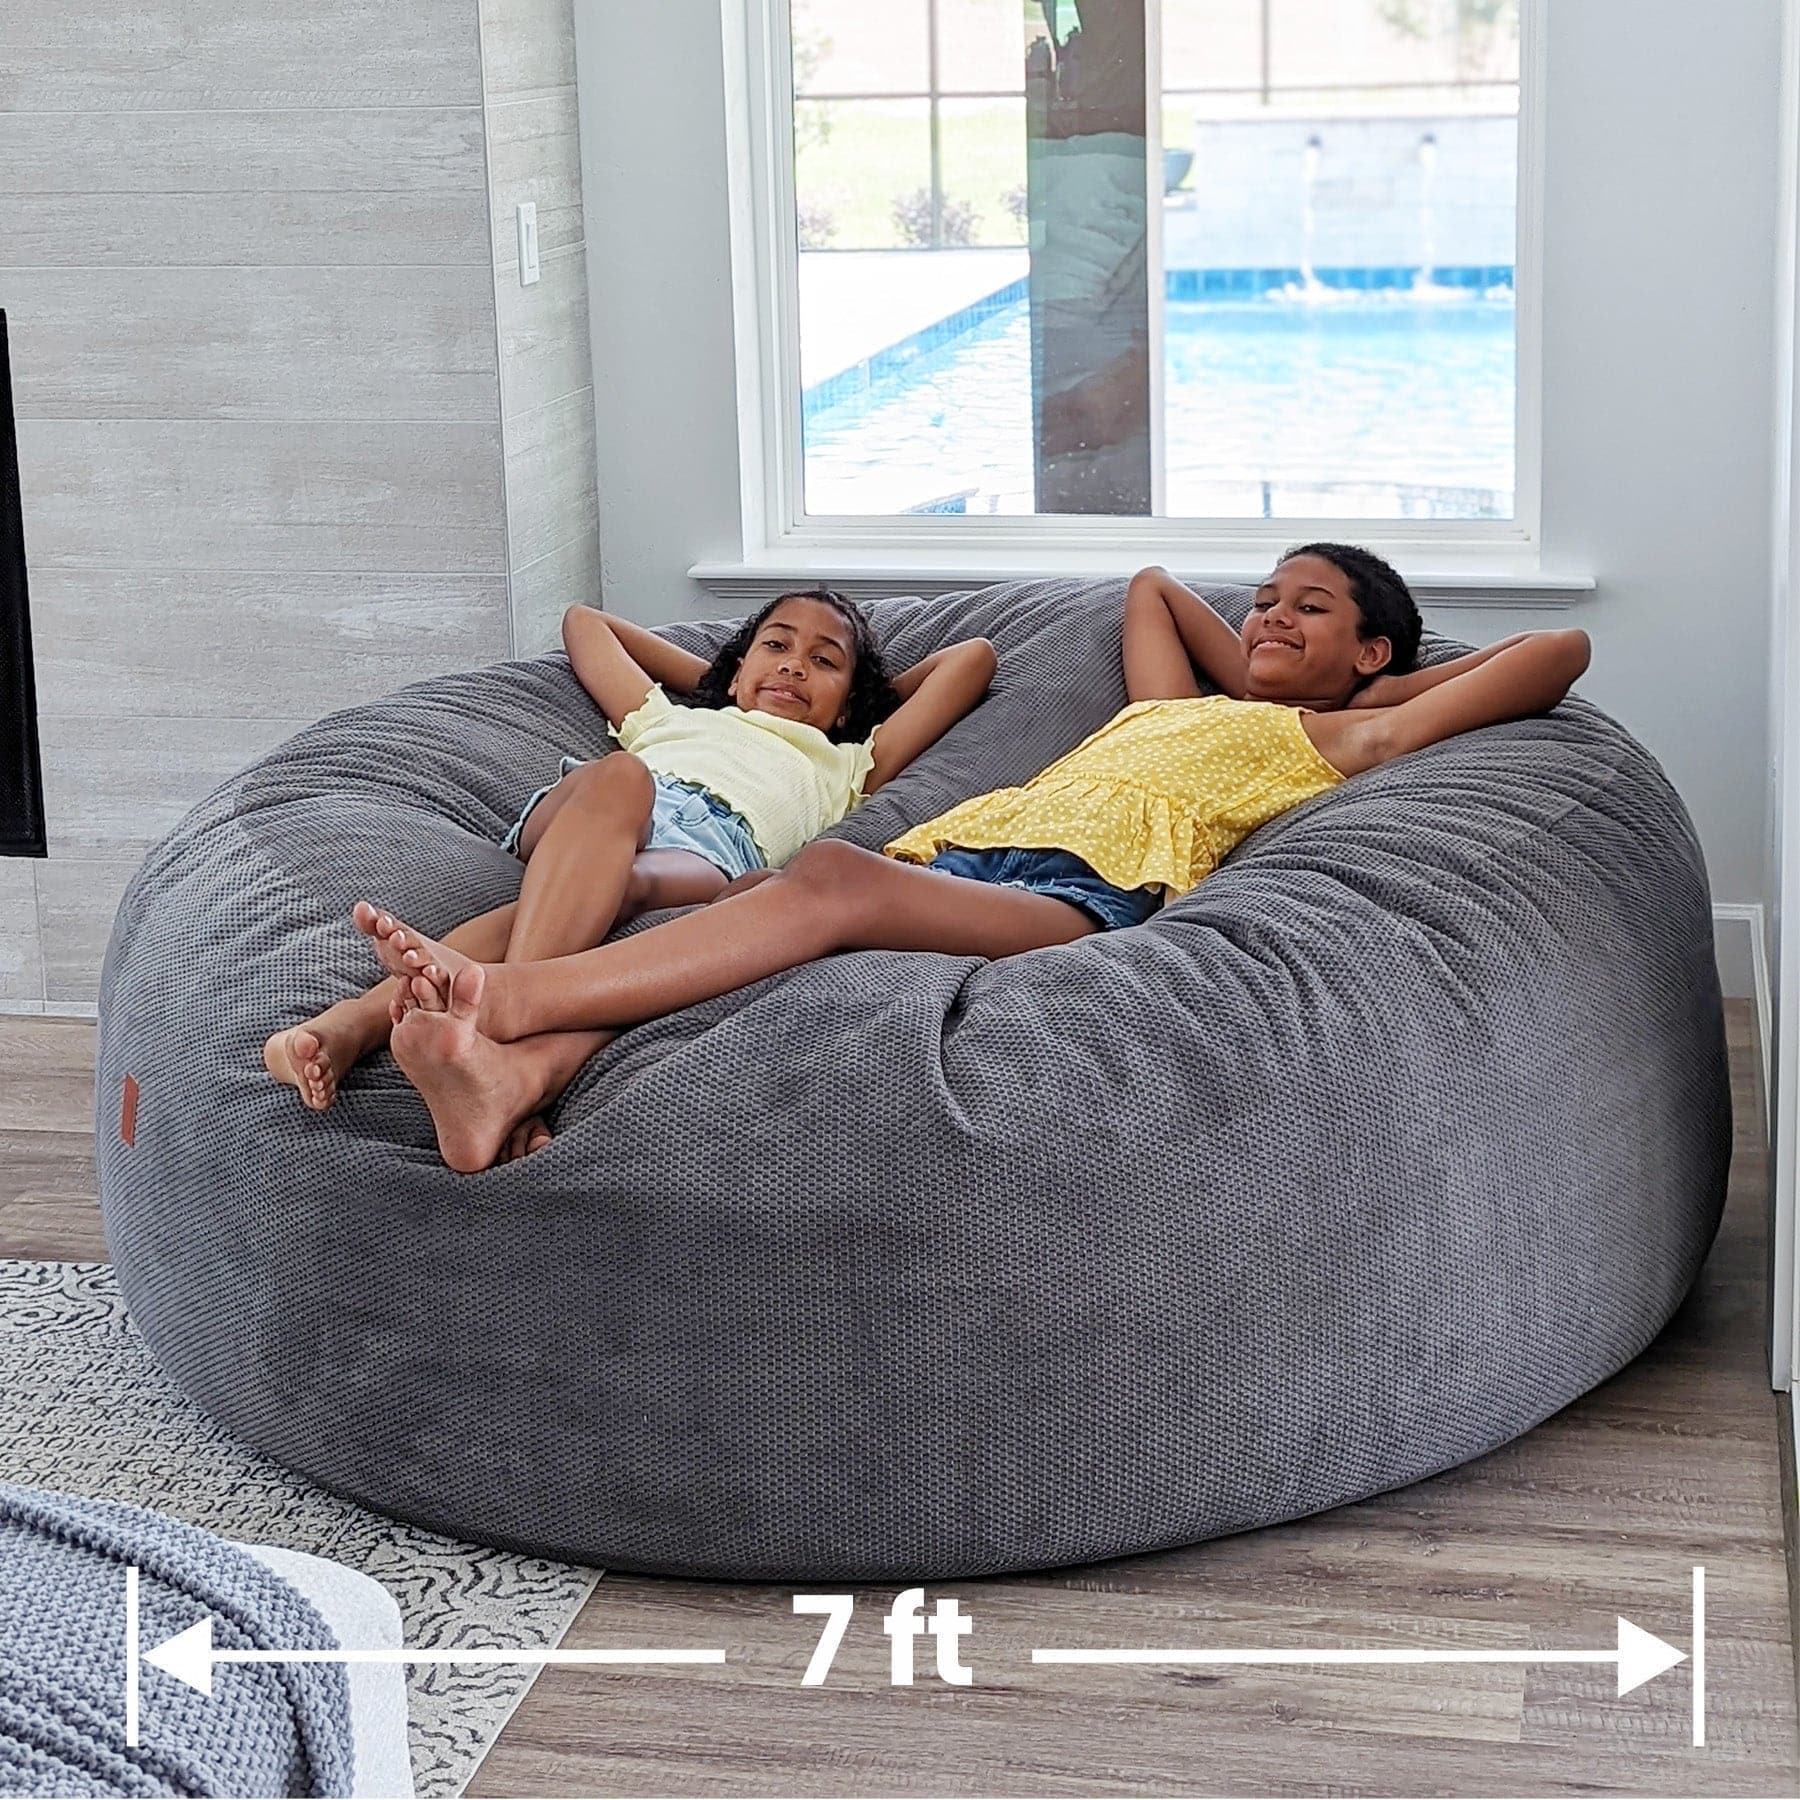  Bean Bag Chairs for Adults Bean Bag Covers Only 7ft